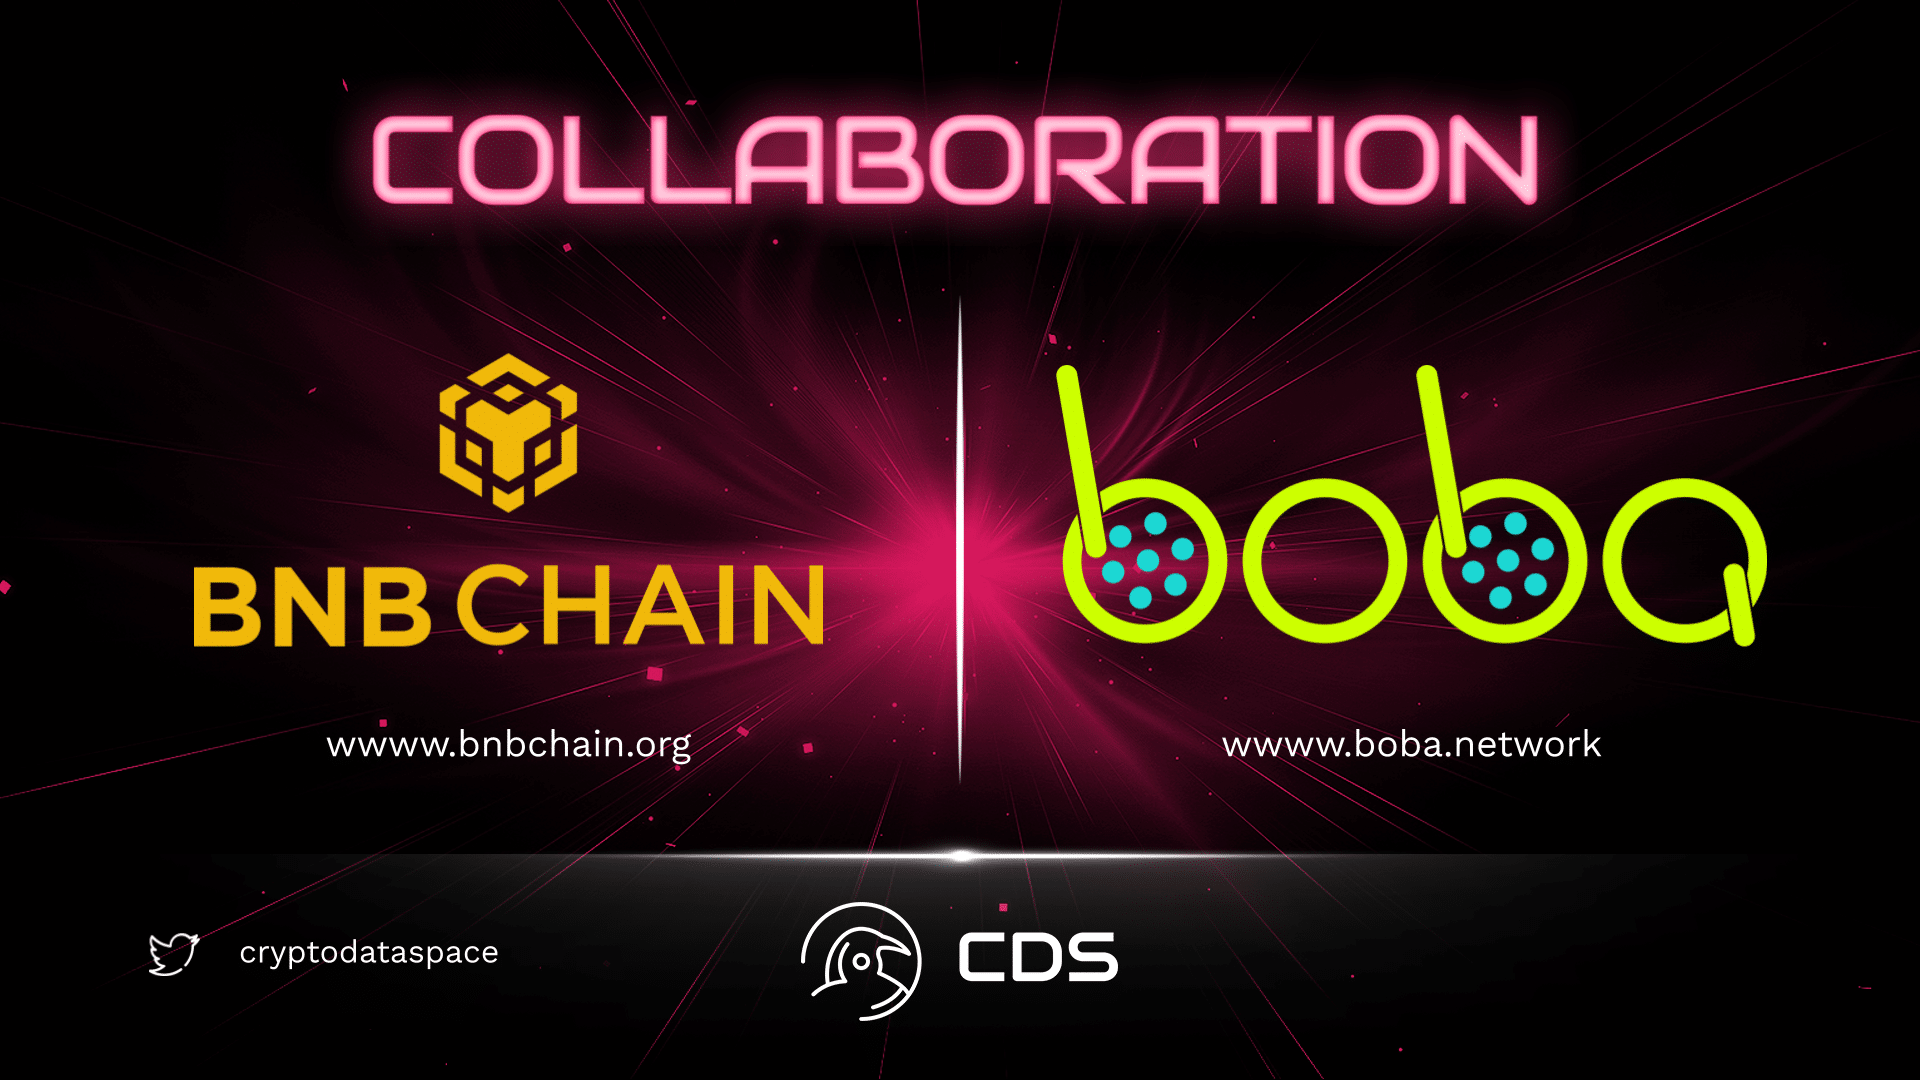 Boba Network Joins BNB Chain